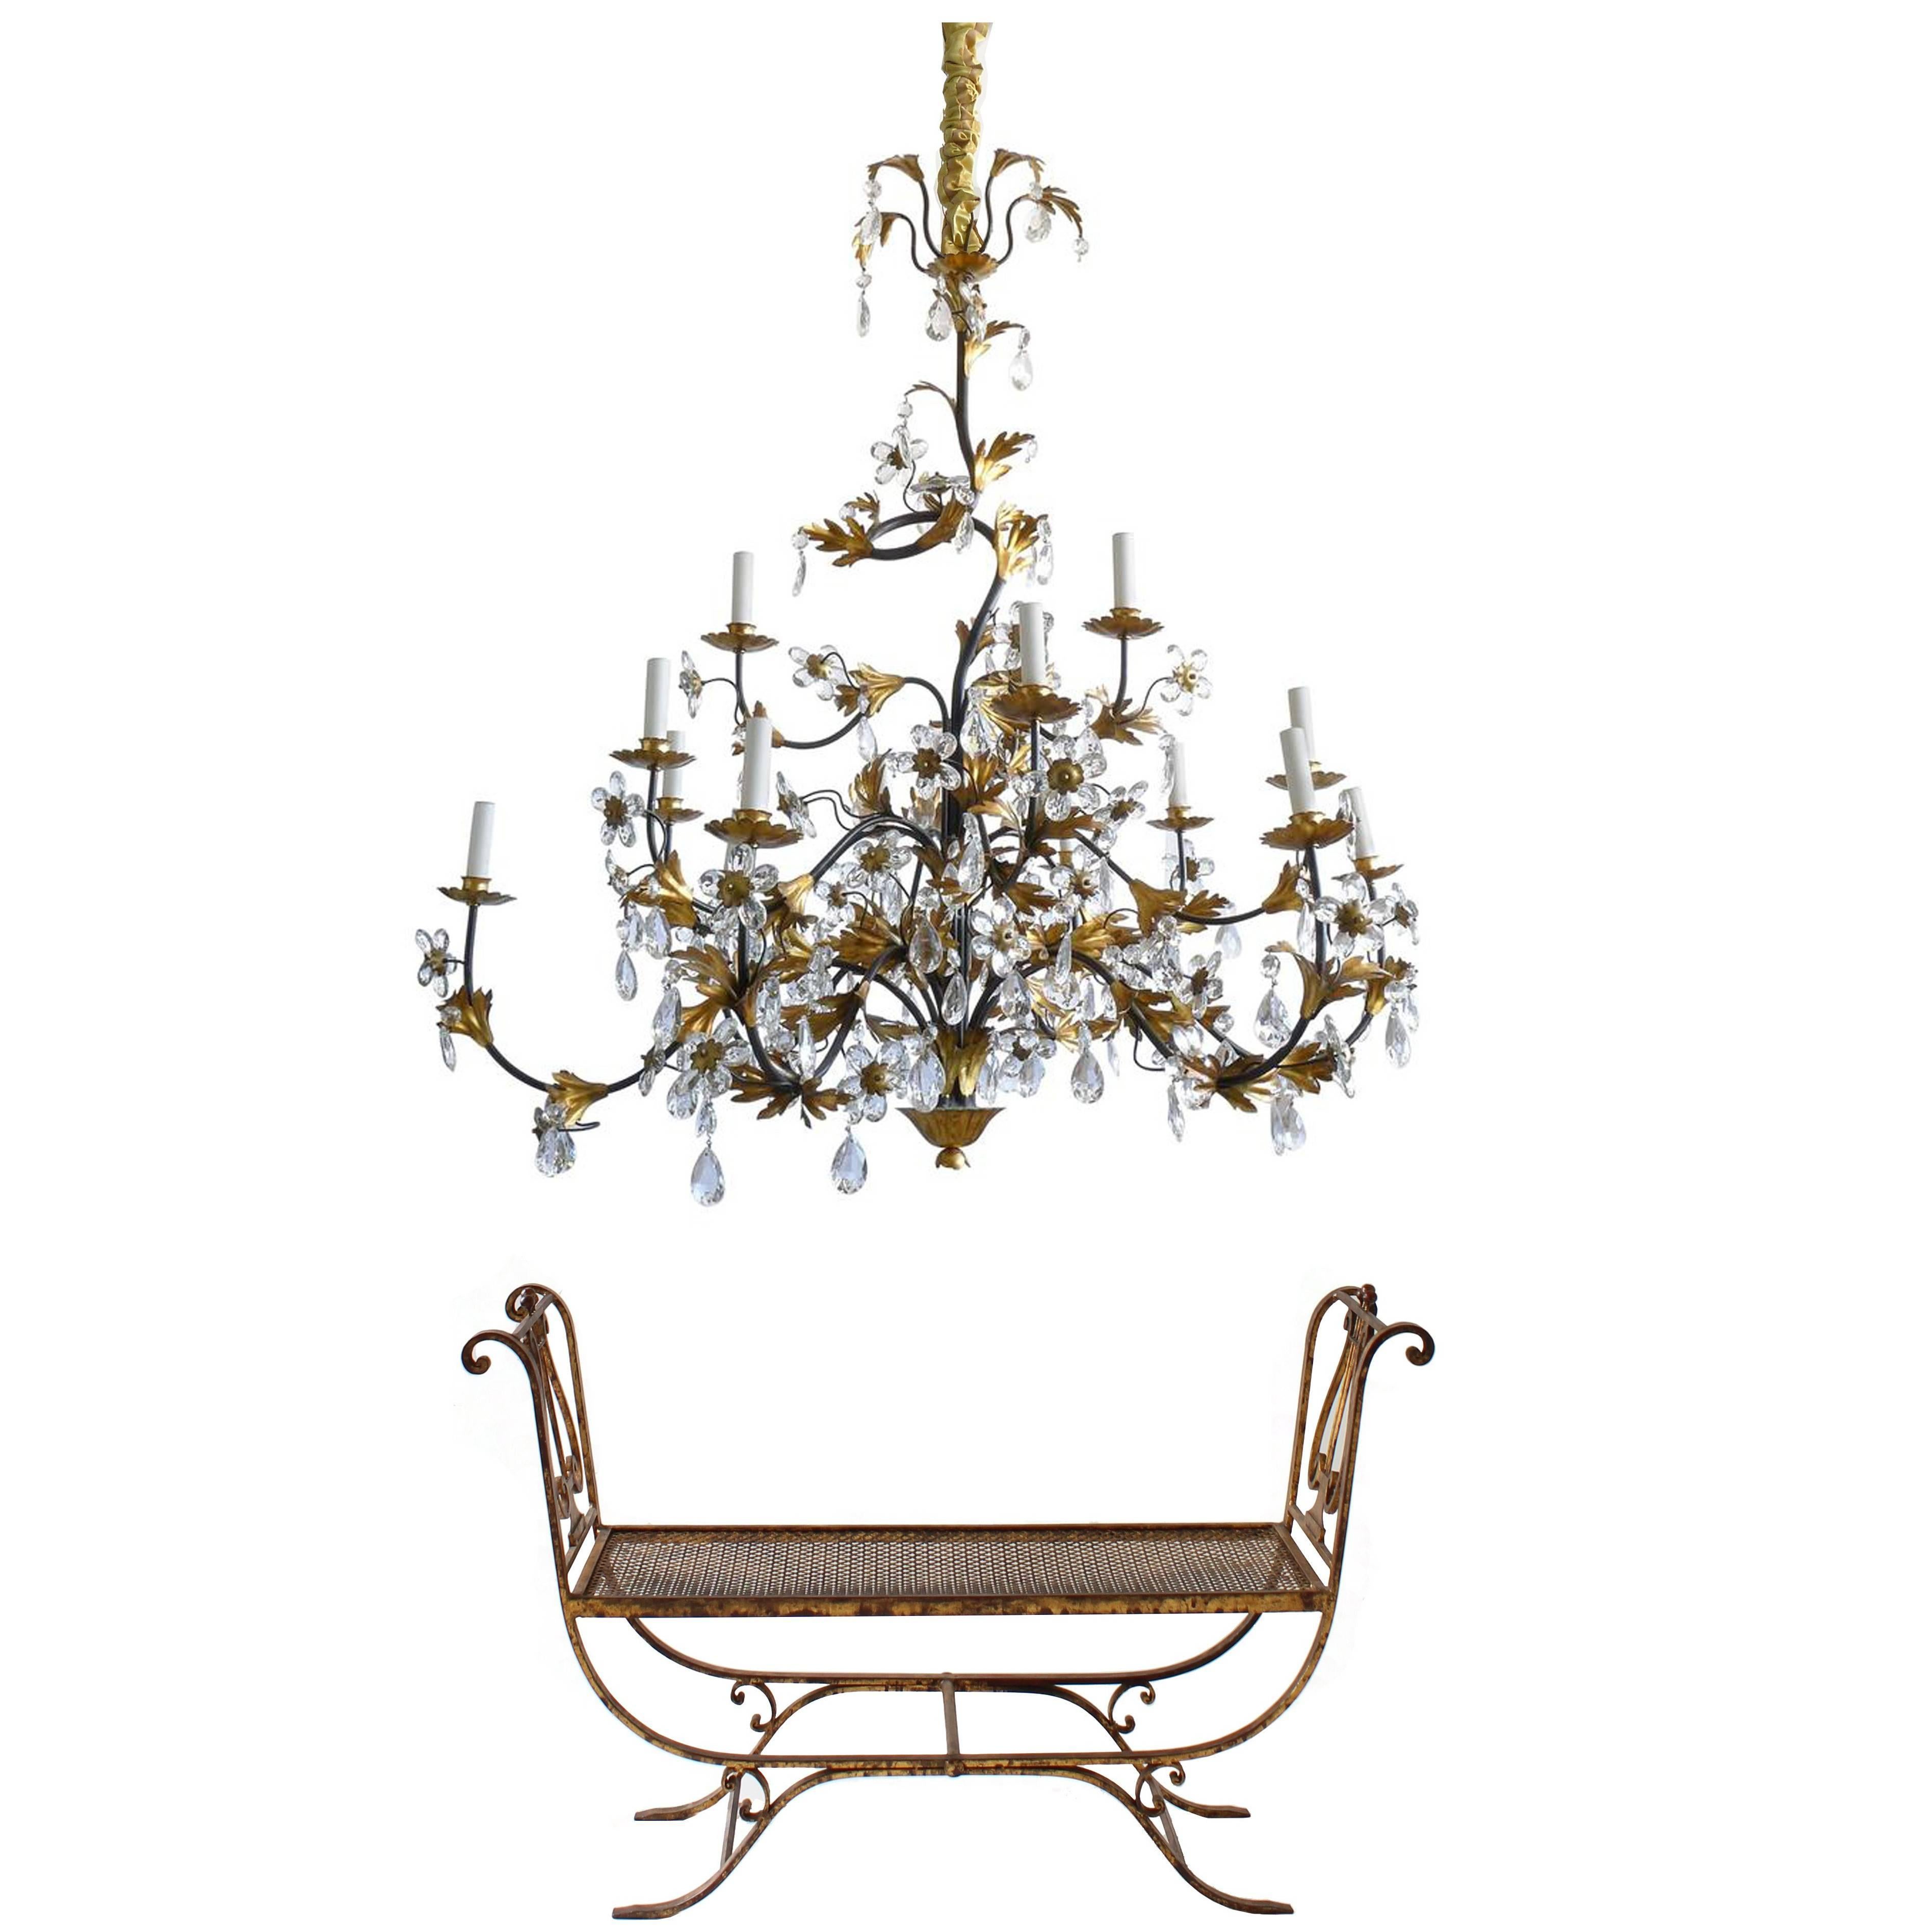 Hollywood Regency Wrought Iron and Crystal Fifteen-Arm Chandelier with Bench For Sale